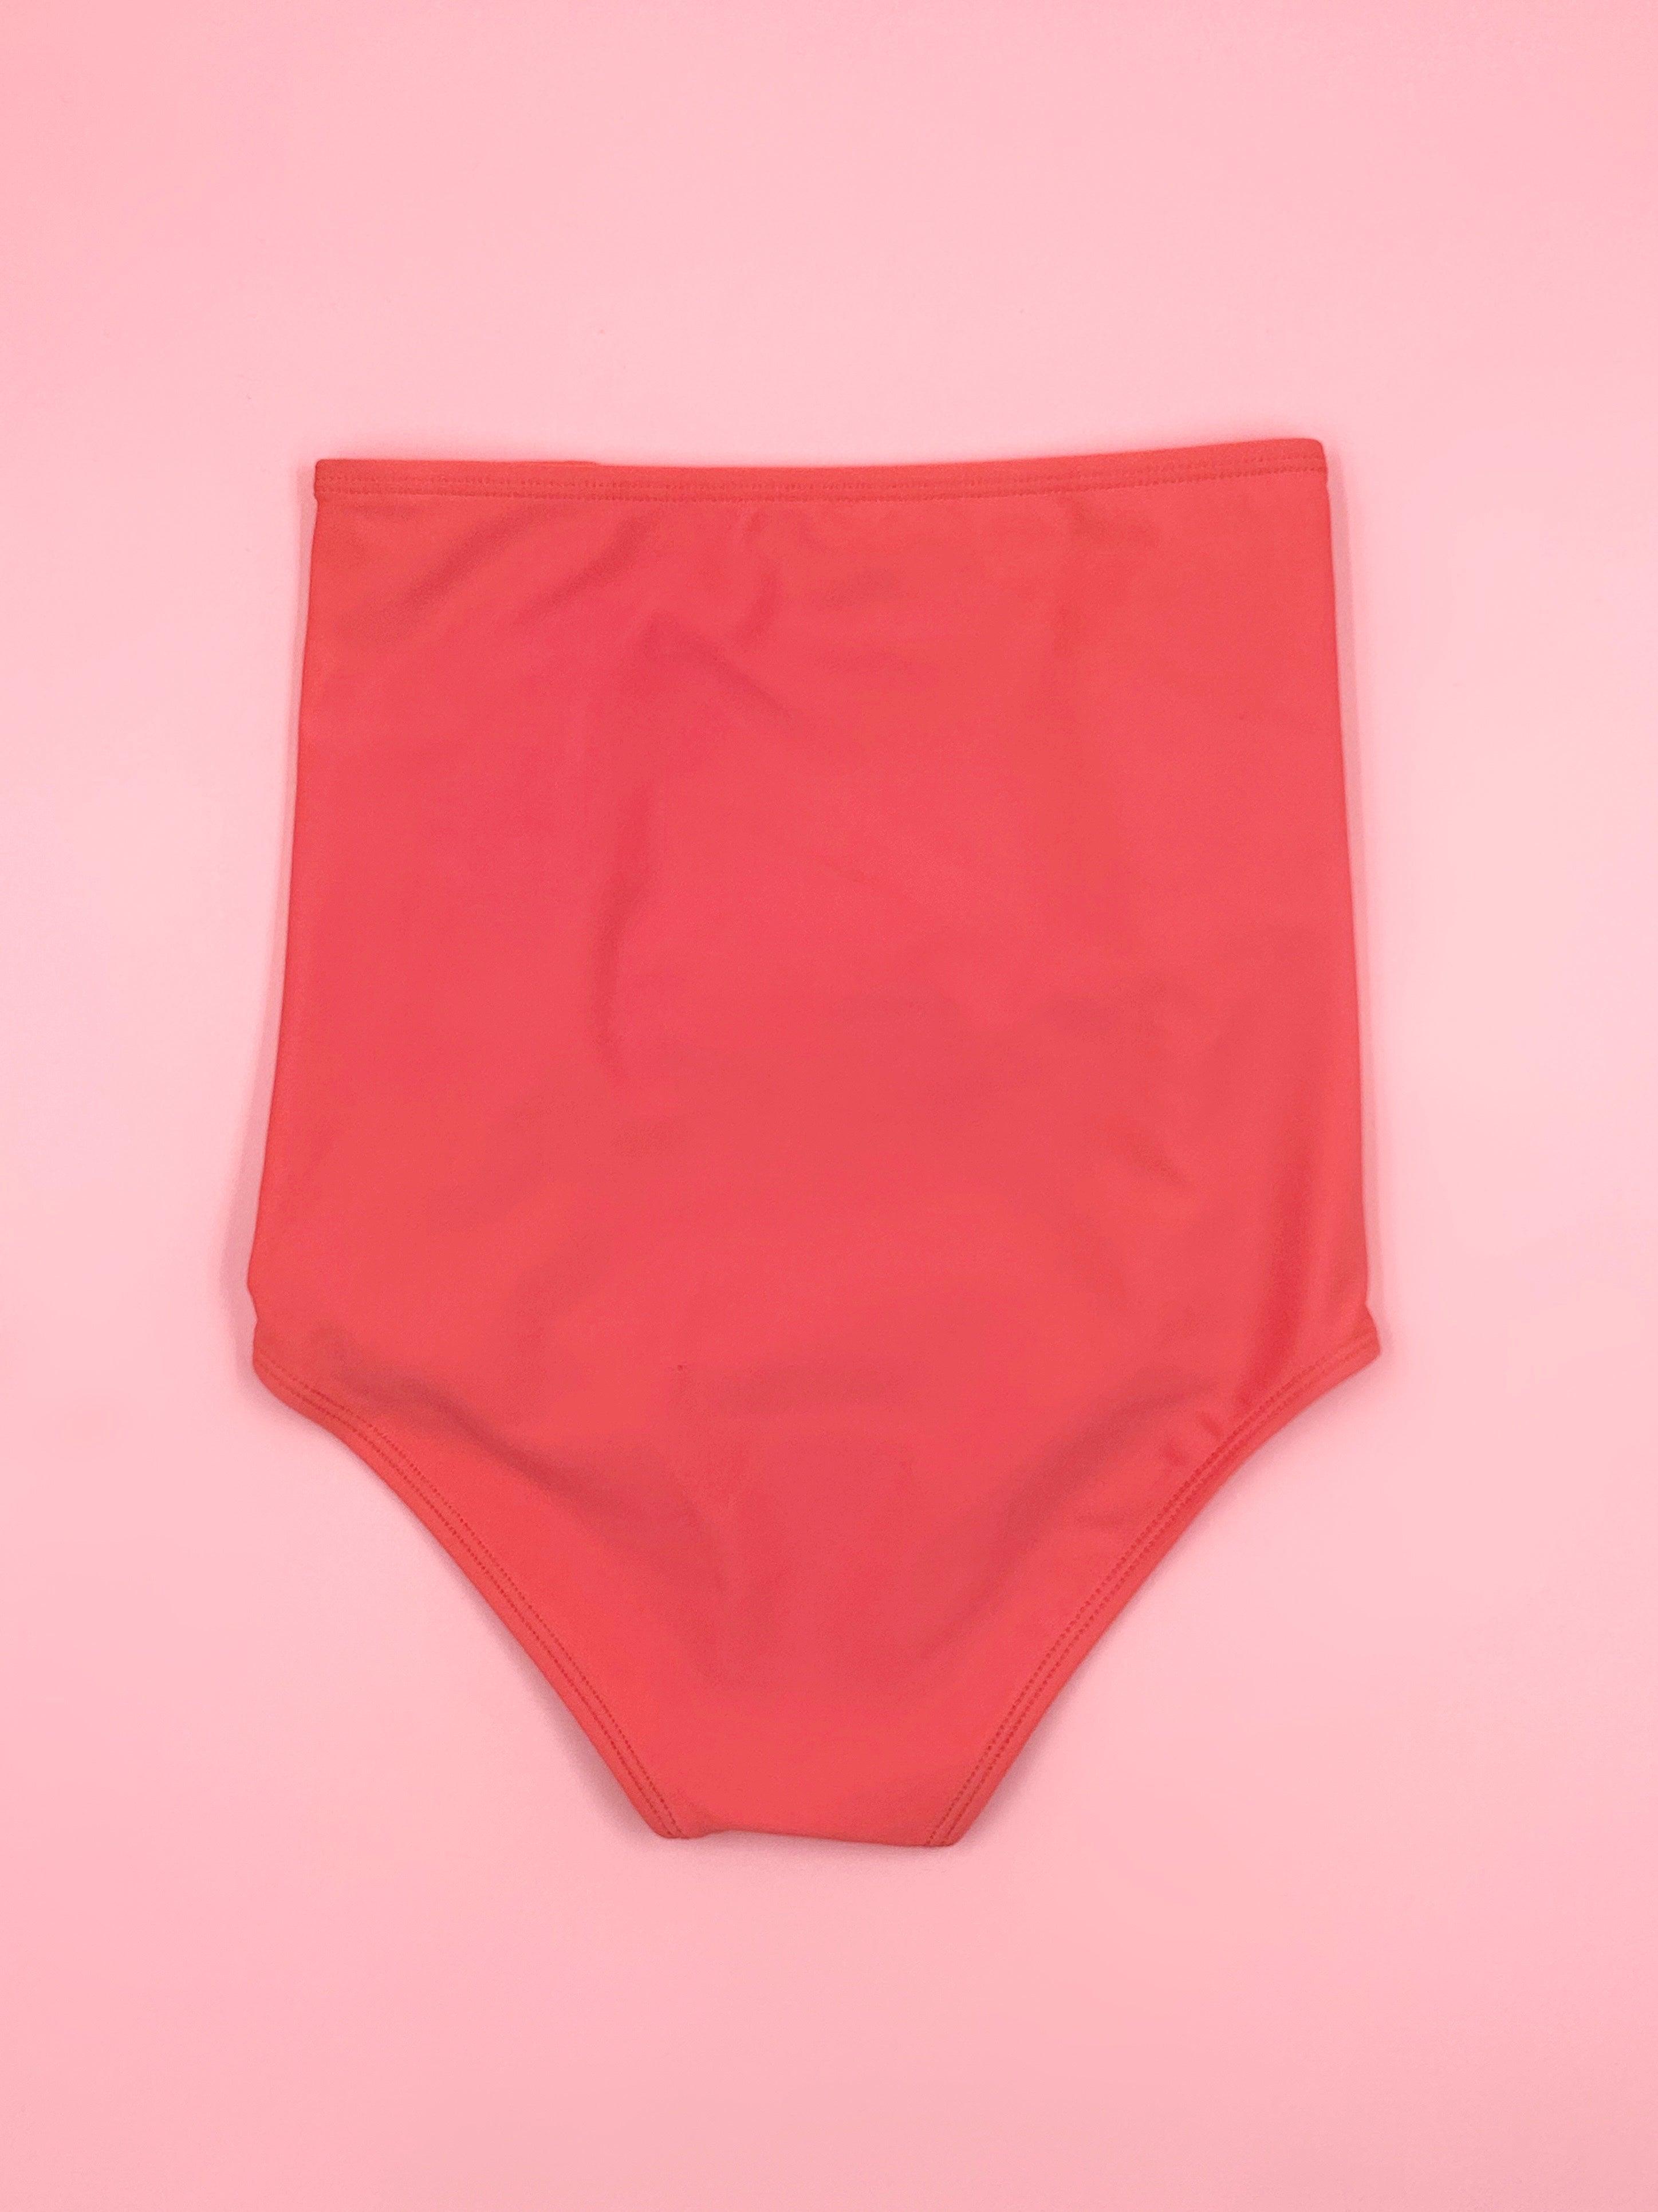 Youth Down in Front Ruffle Bottoms | Deep Coral - Kortni Jeane